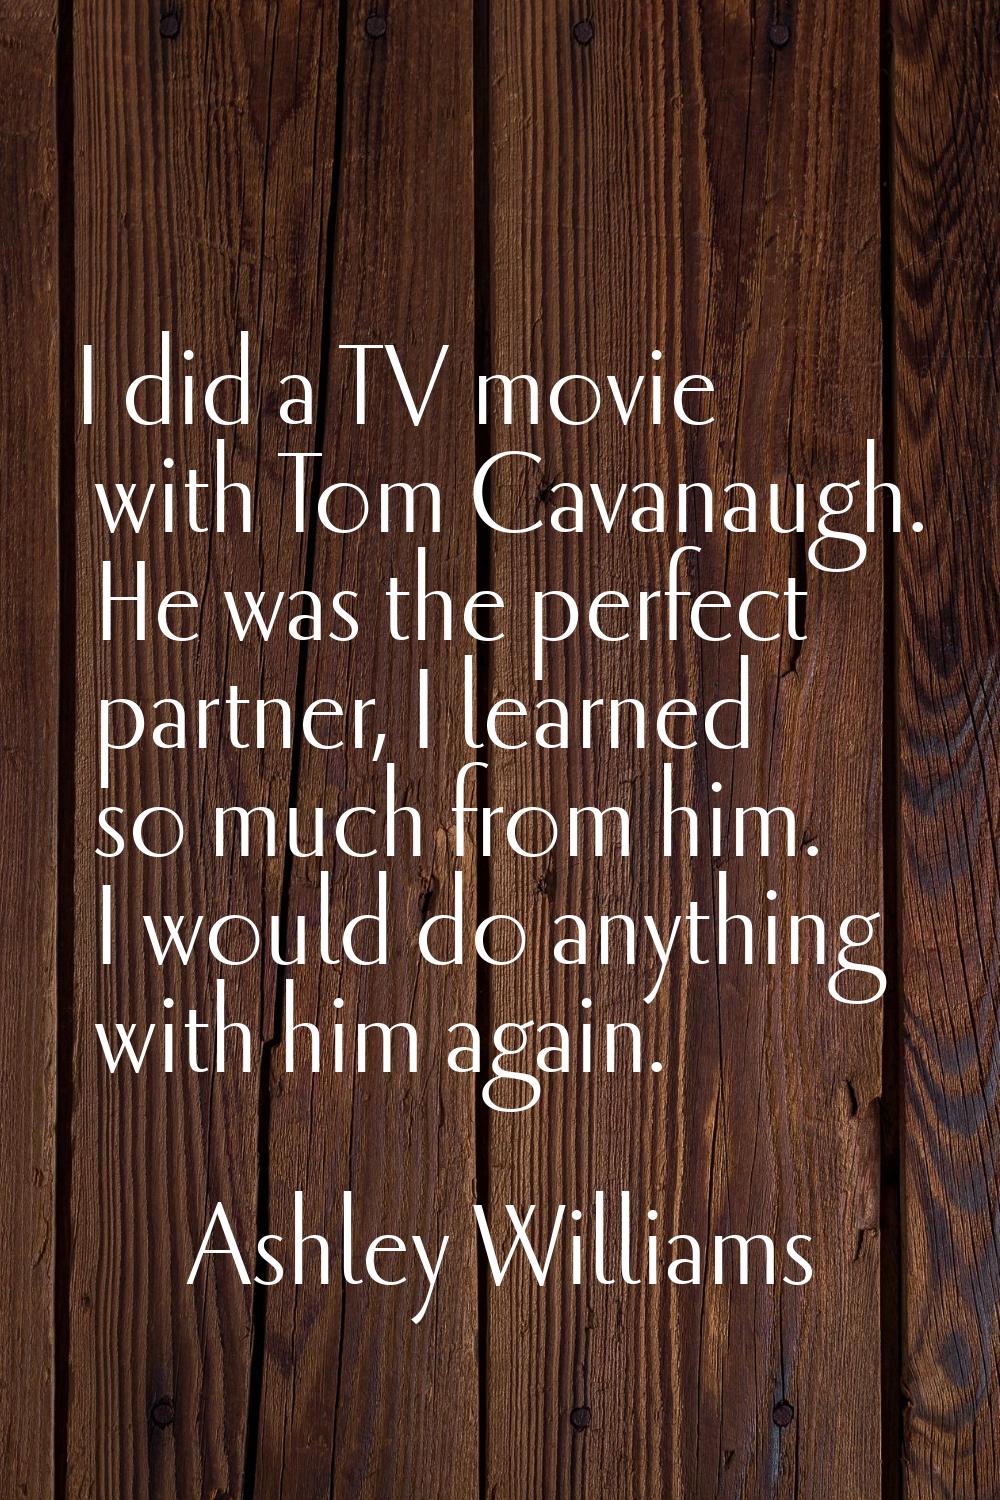 I did a TV movie with Tom Cavanaugh. He was the perfect partner, I learned so much from him. I woul